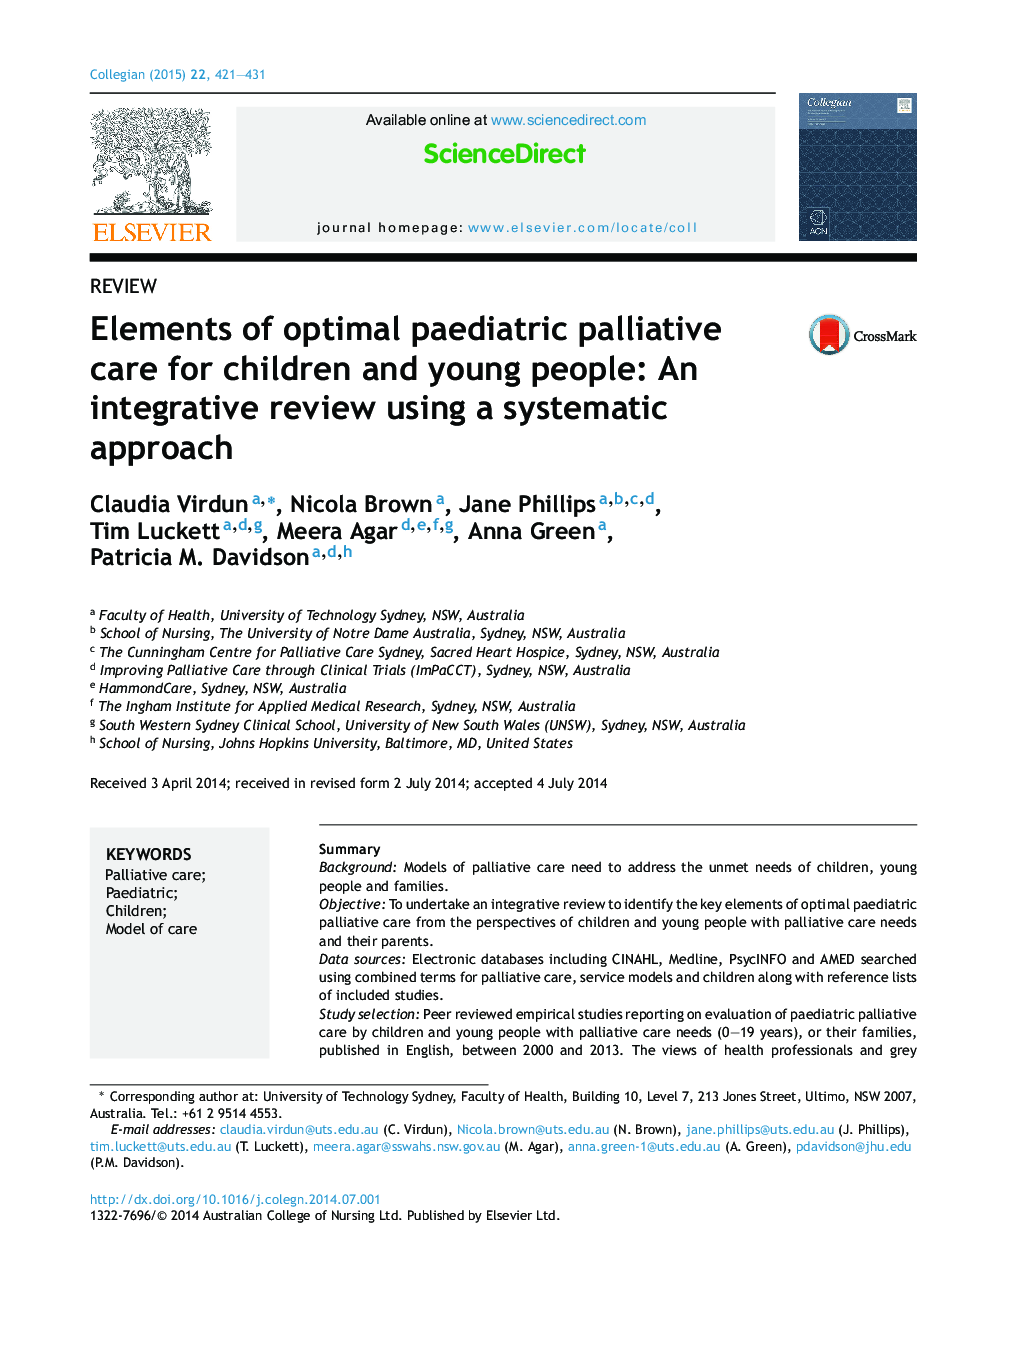 Elements of optimal paediatric palliative care for children and young people: An integrative review using a systematic approach